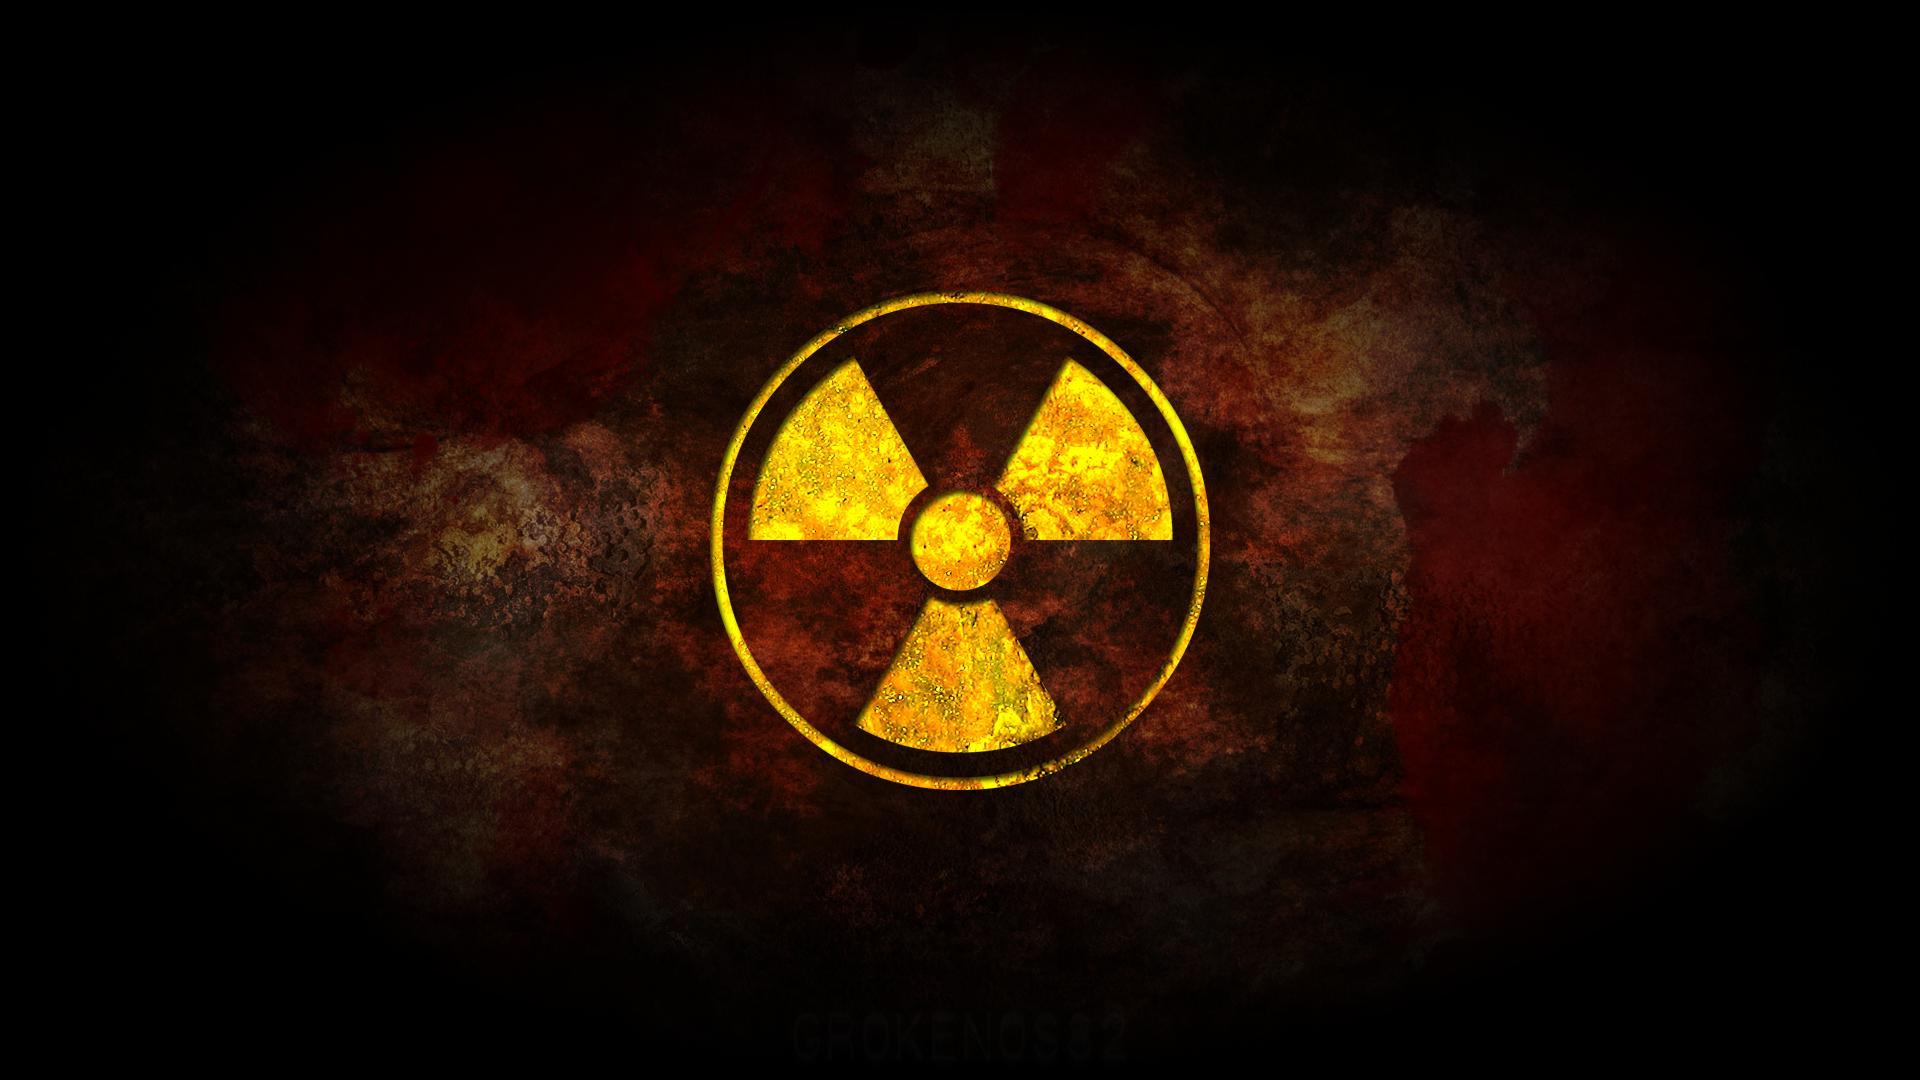 Radioactive Live Wallpaper for Android